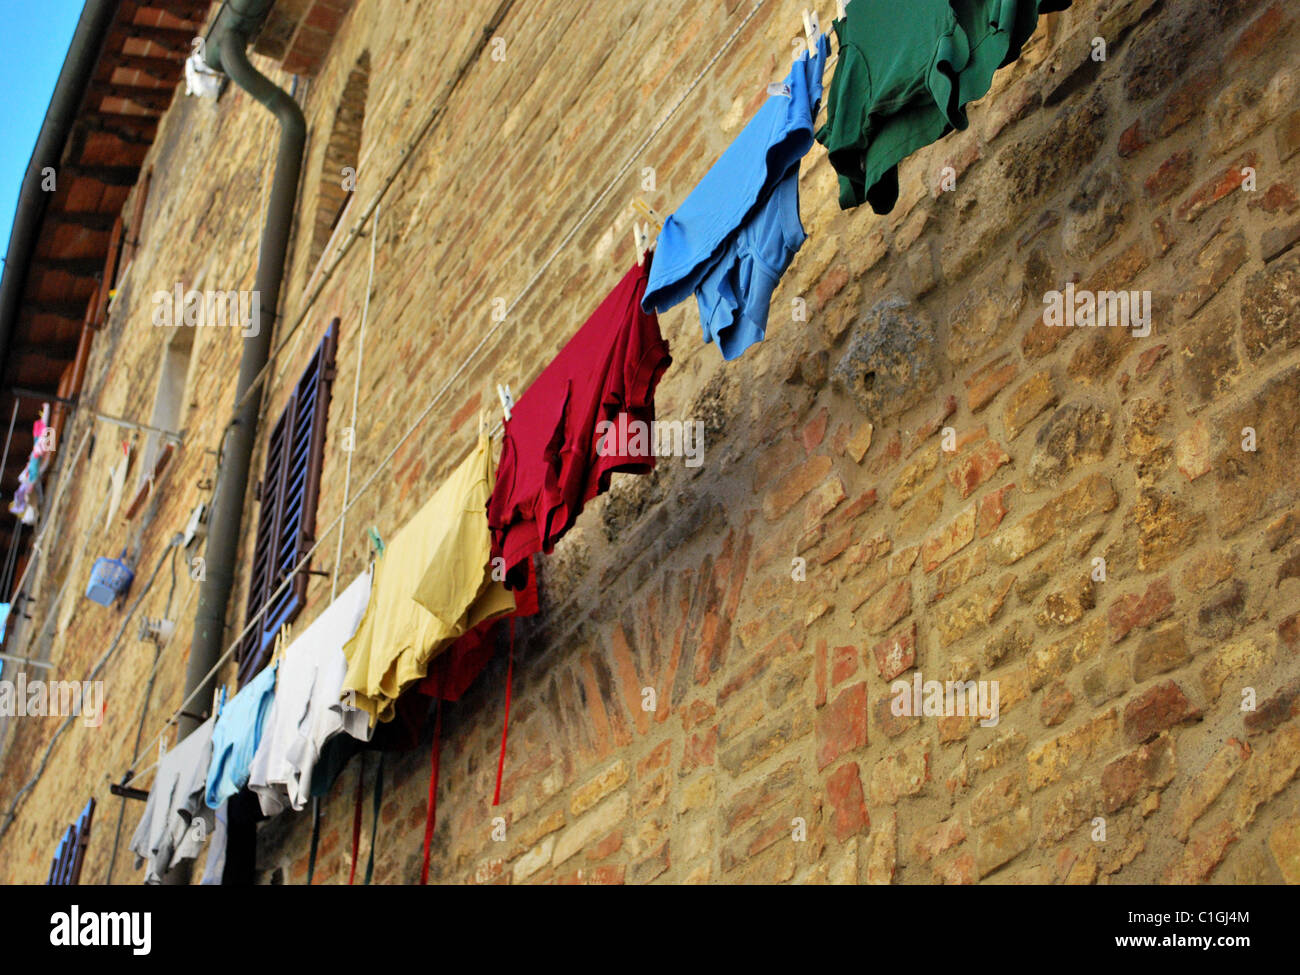 Colourful t-shirts drying in the sun, Tuscanny, Italy June 2008 Stock Photo